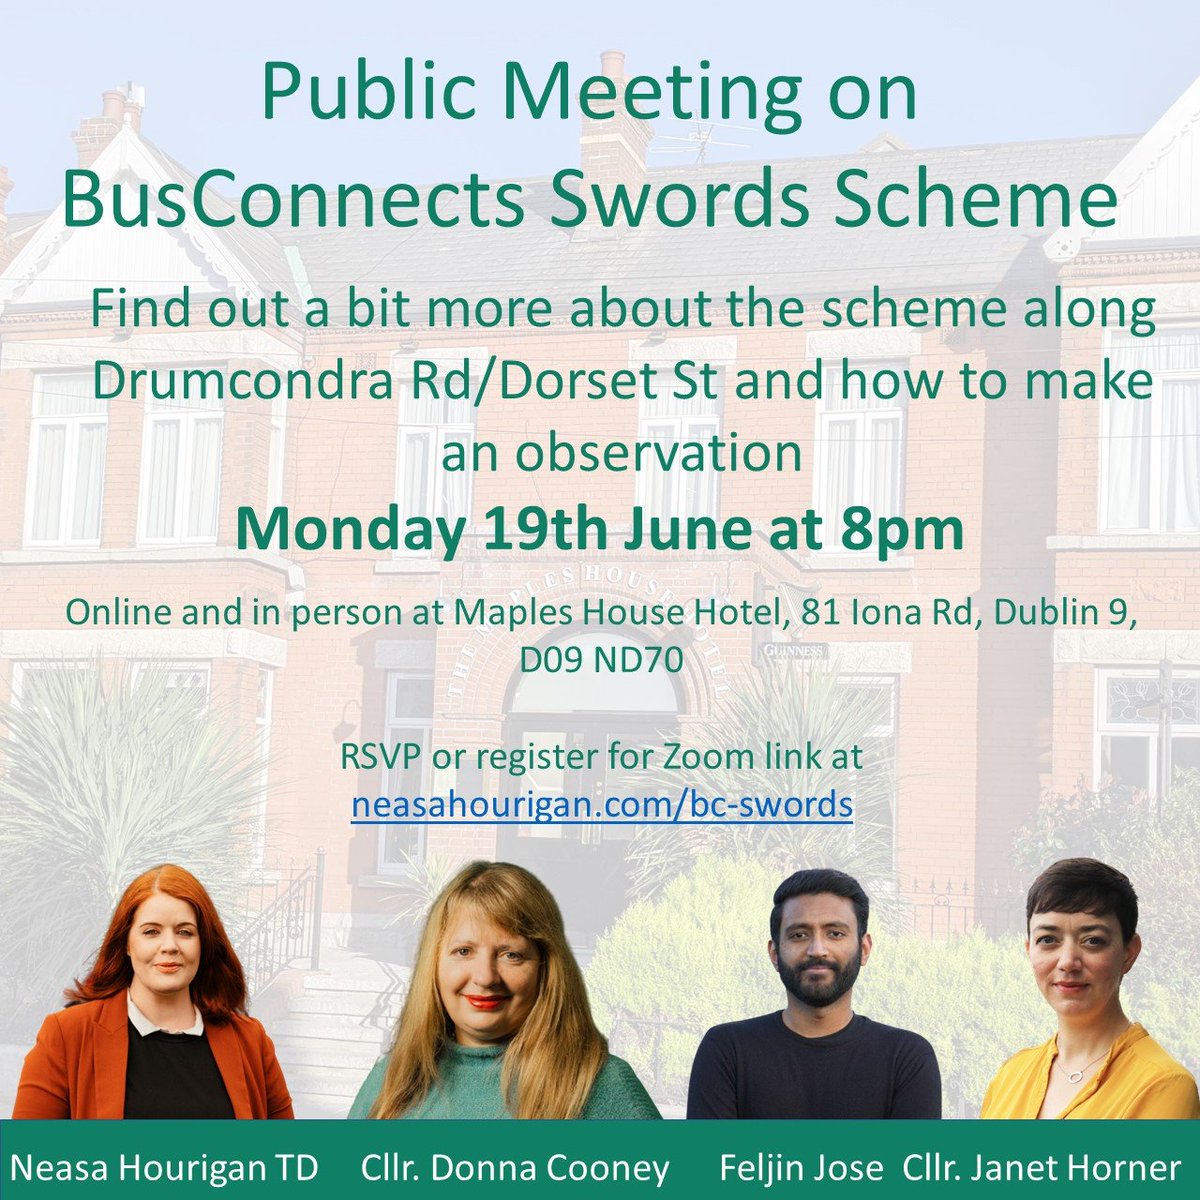 The BusConnects Swords to City Centre project is out for planning approval. No, they're not cutting down all the trees in Drumcondra. Let's cut through the misinformation together:
🕗 Mon 19 June @ 8pm 
📍 Maples House Hotel & Zoom
🔗 RSVP neasahourigan.com/bc-swords